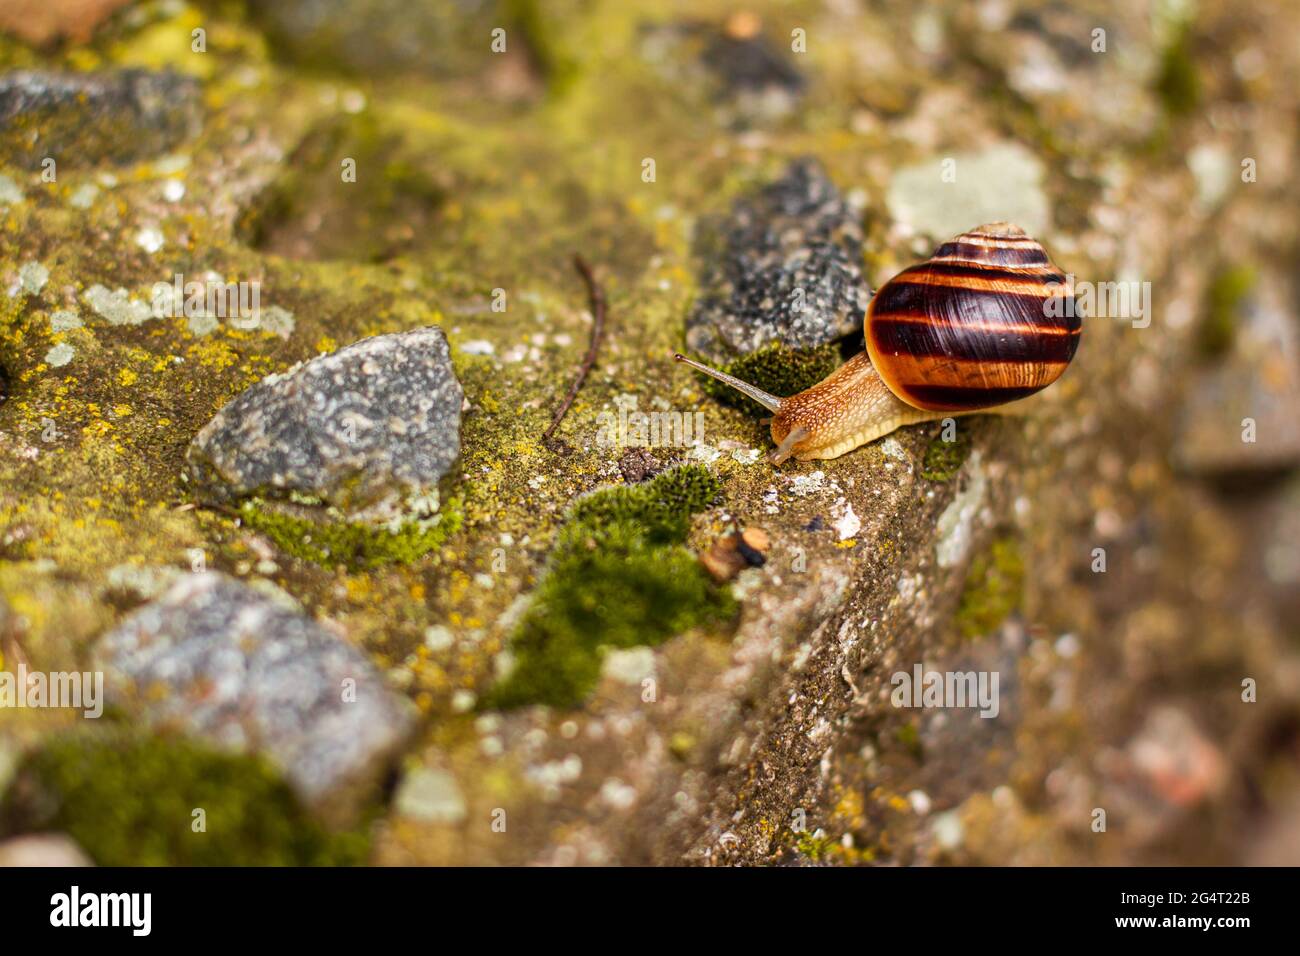 Close up snail on green moss among pebbles. Nature animals concept with copy space outdoor on daylight shot Stock Photo